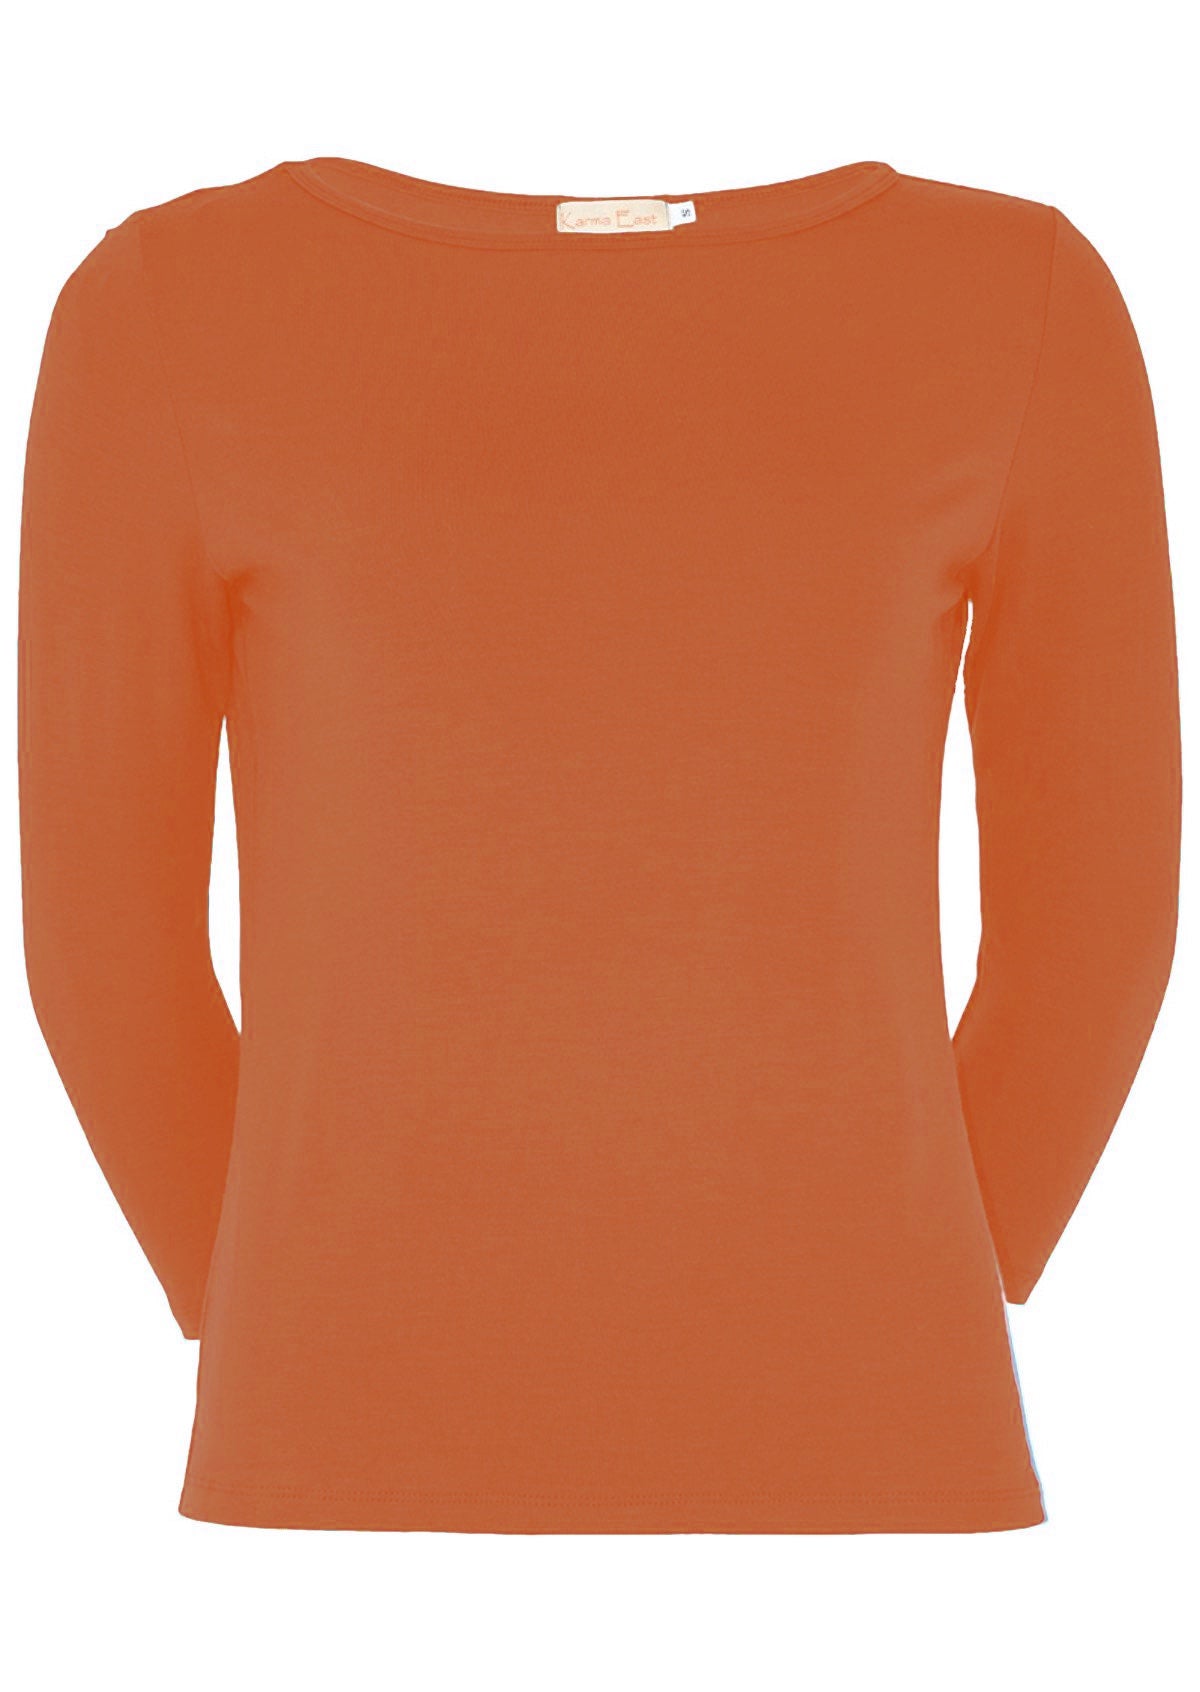 Front view of women's rayon boat neck orange 3/4 sleeve top.